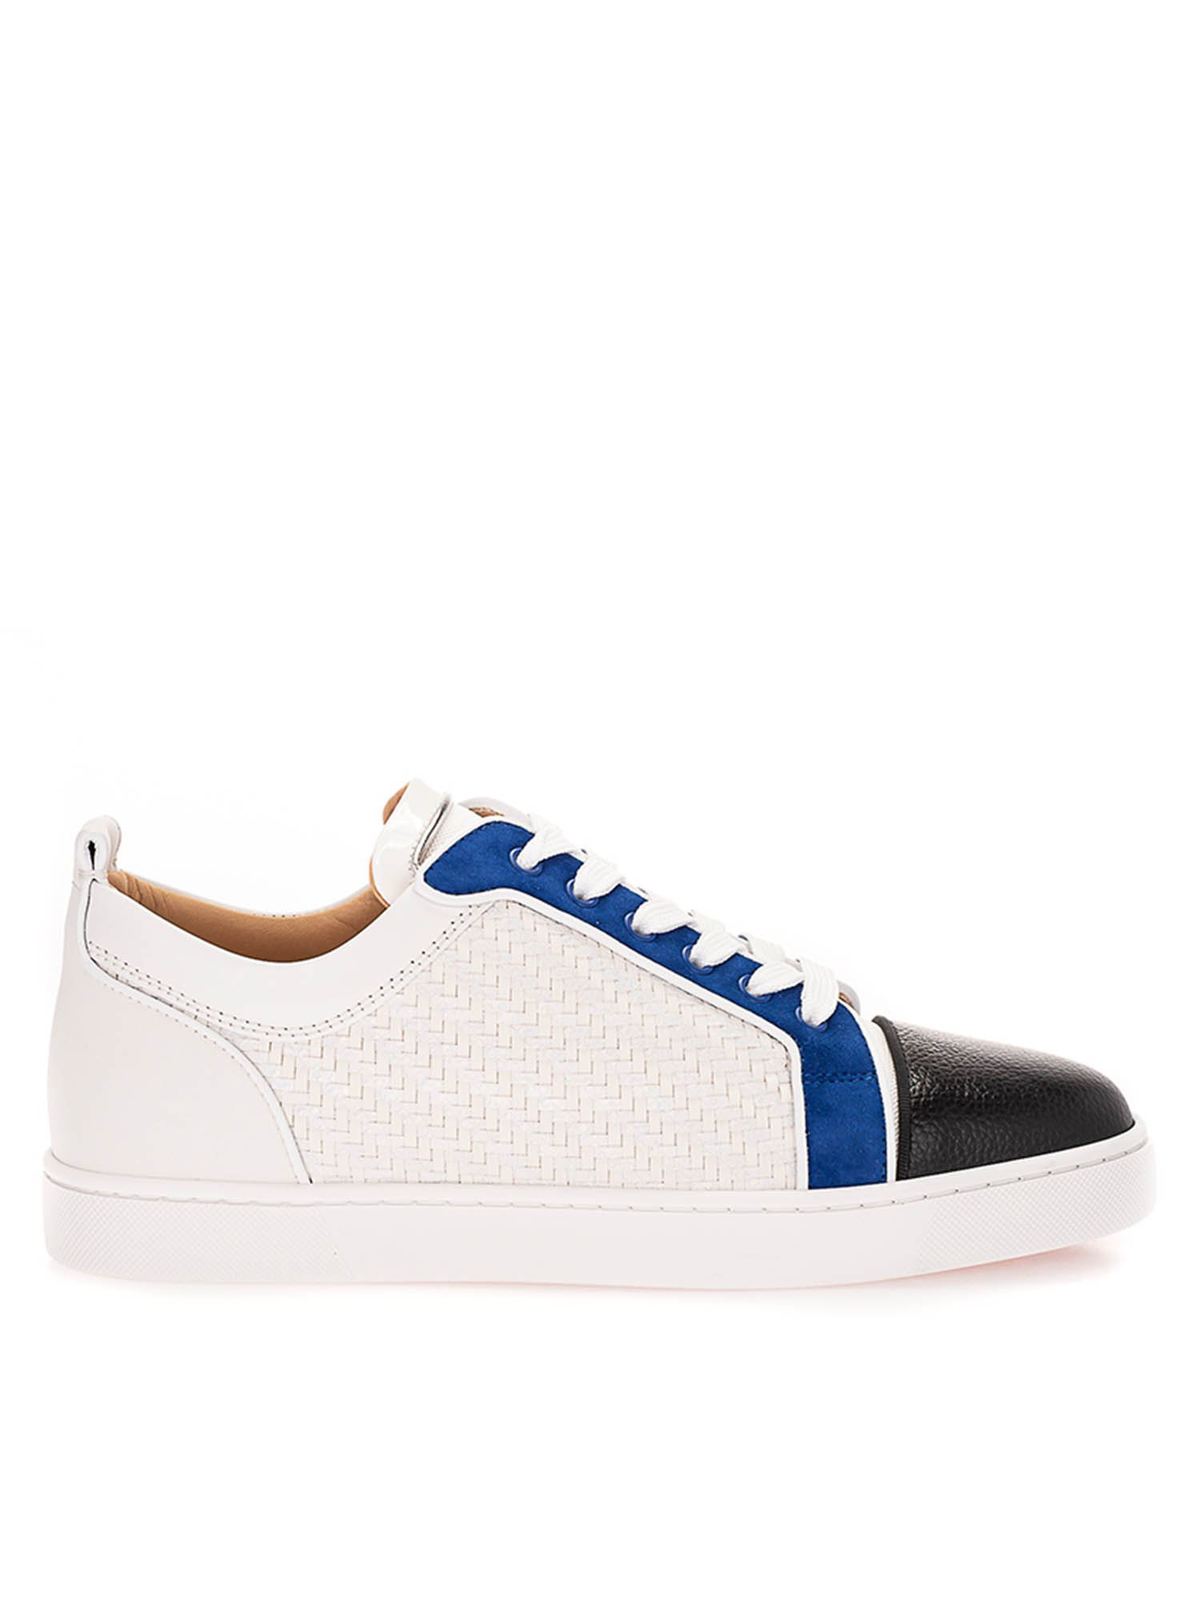 lunken Danmark Jeg spiser morgenmad Trainers Christian Louboutin - Woven sneakers in white and blue -  1210845CMA3